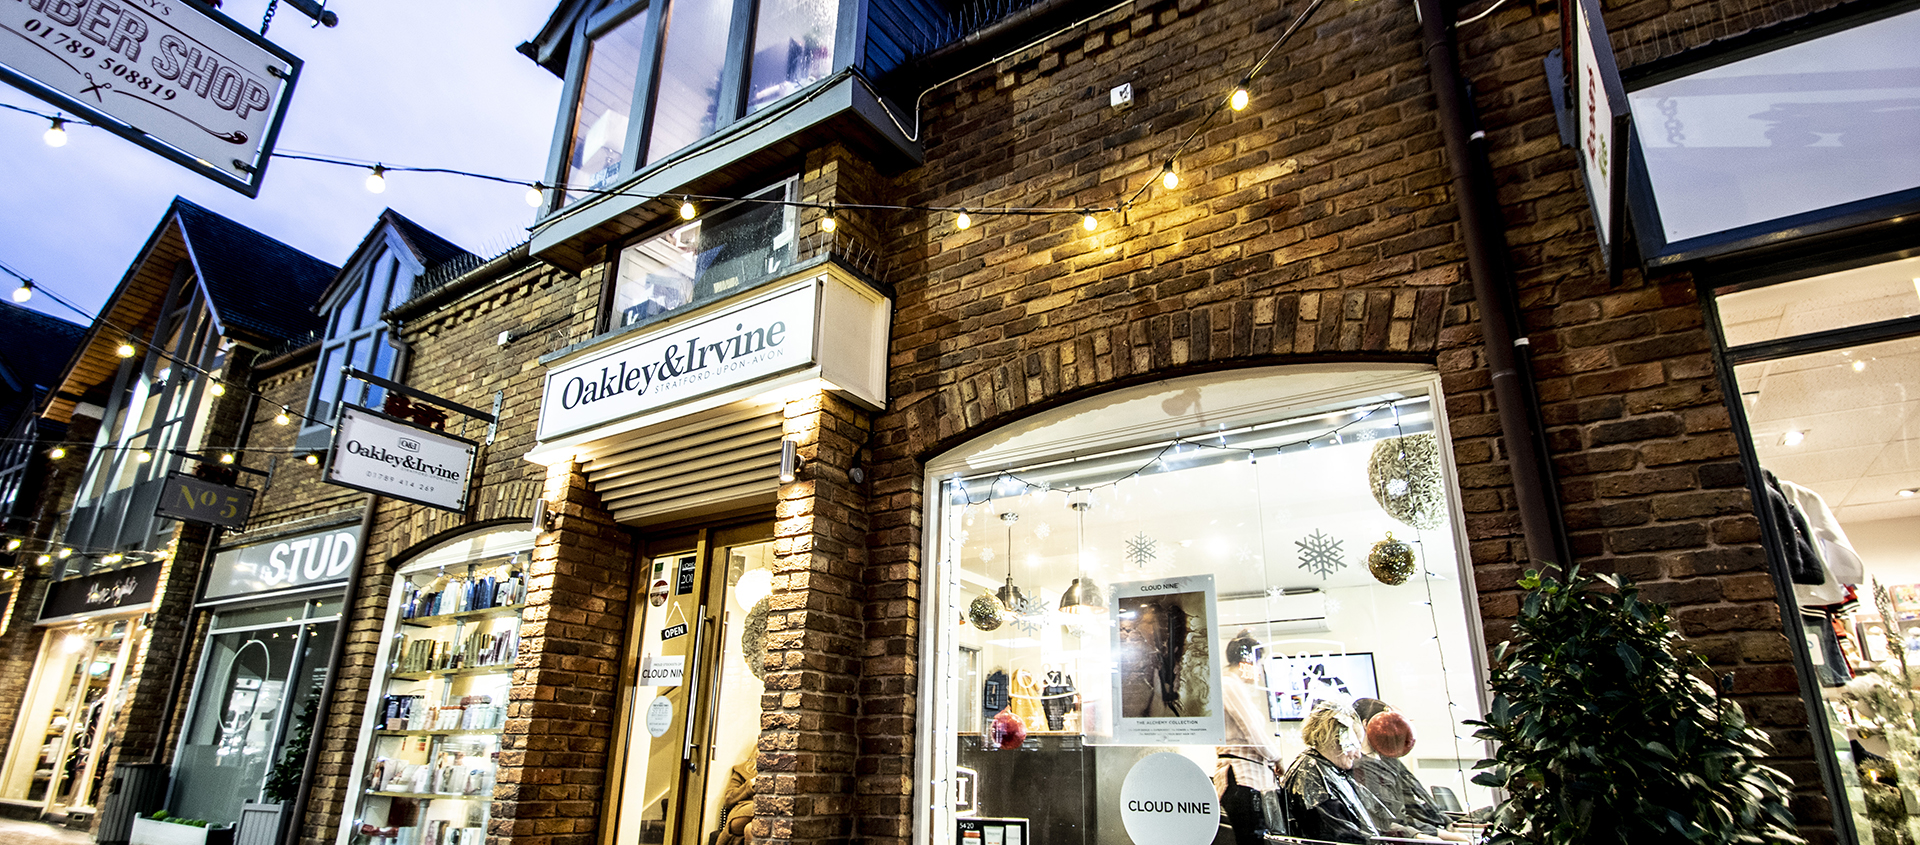 Contact Us | Oakley and Irvine